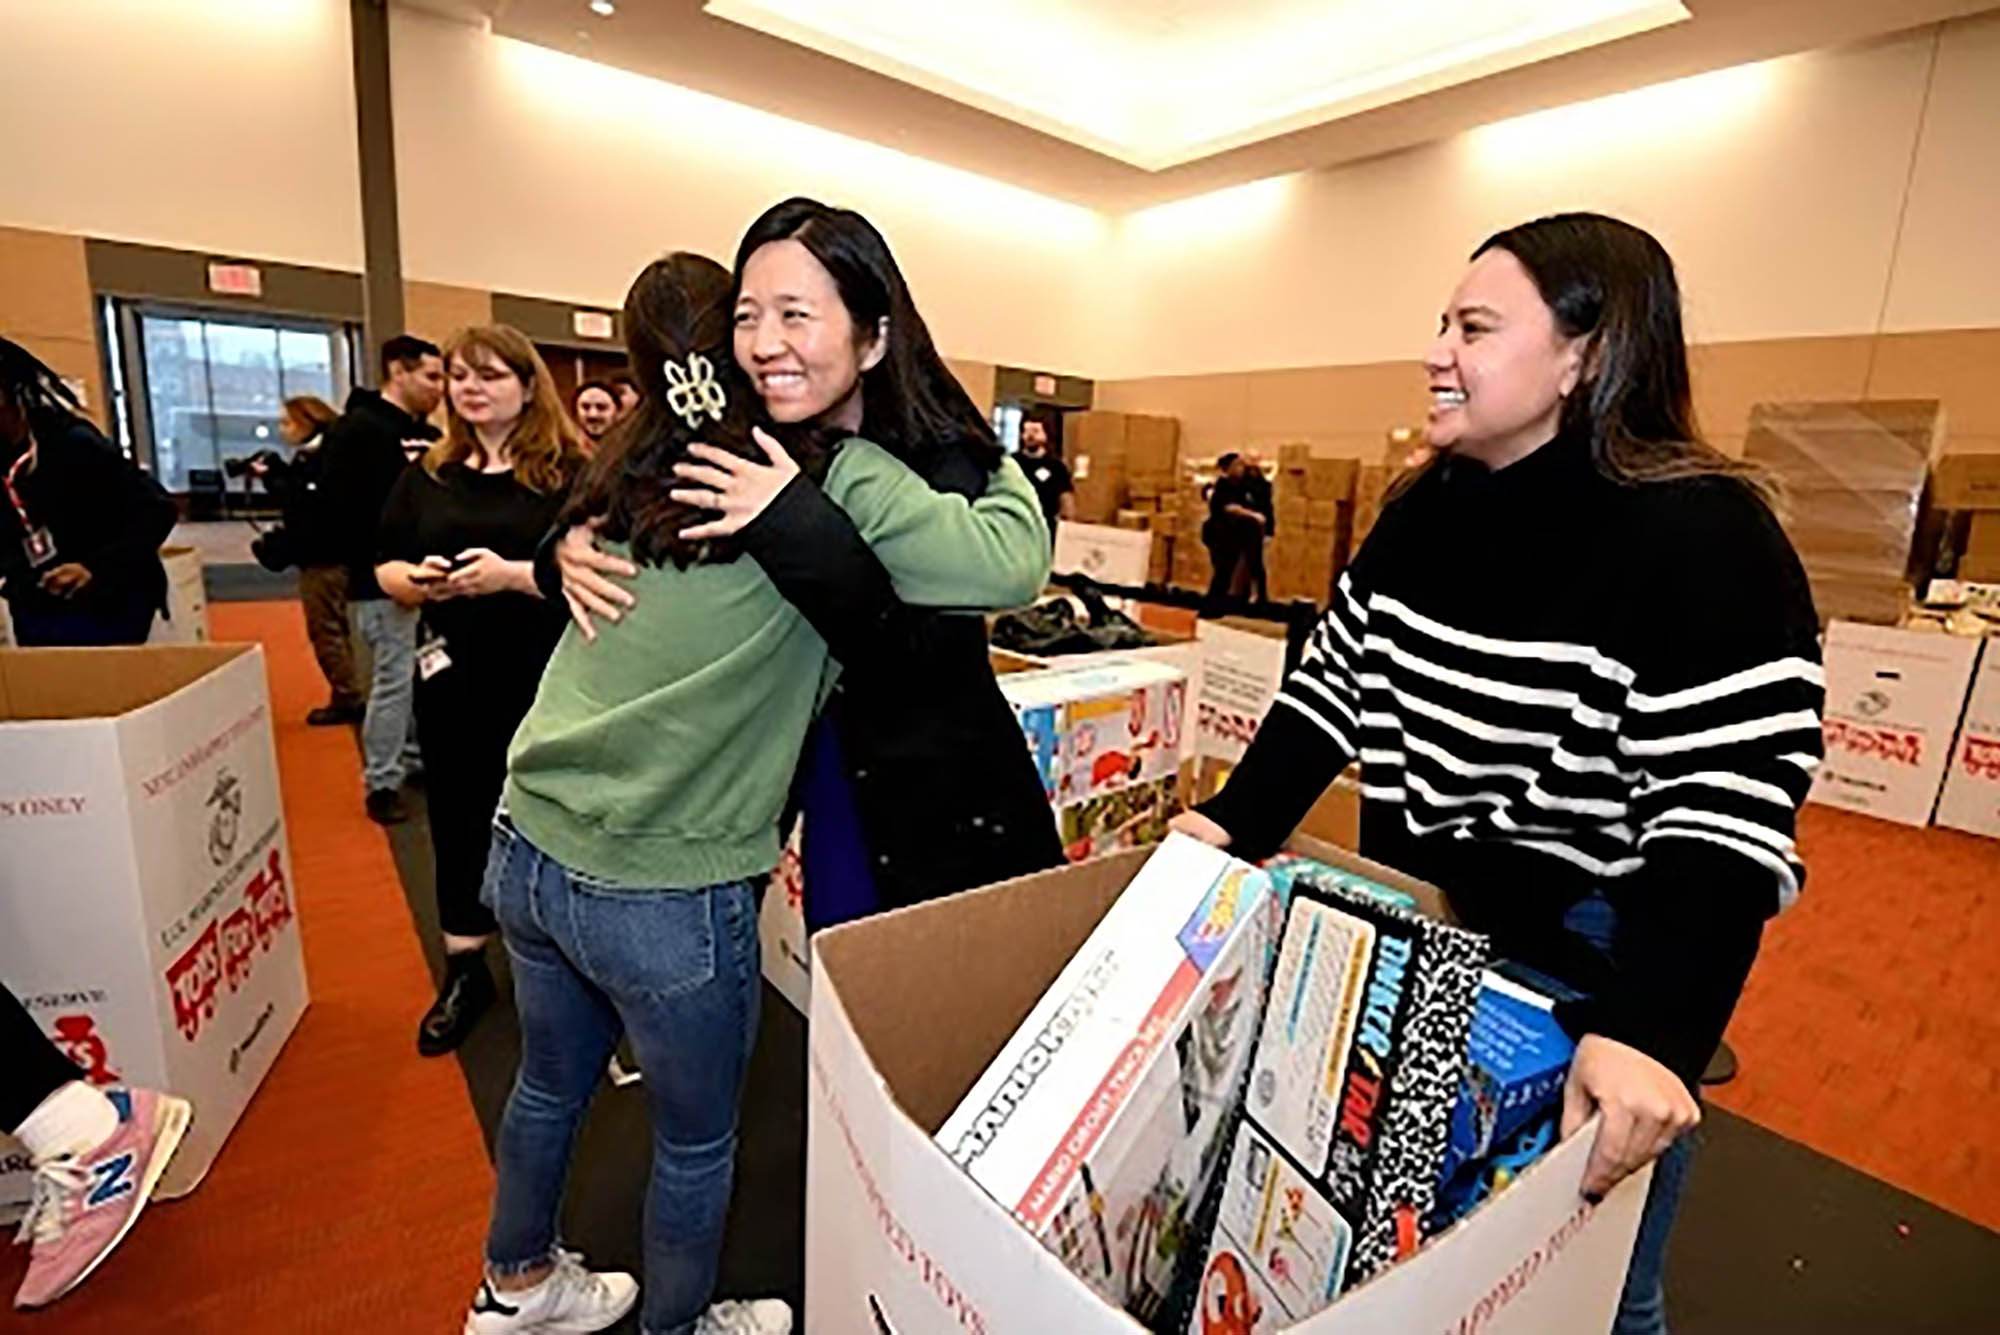 Photo: Mayor Michelle Wu stops by the Toys for Tots to tour the operation and to greet and thank the volunteers and organizers.